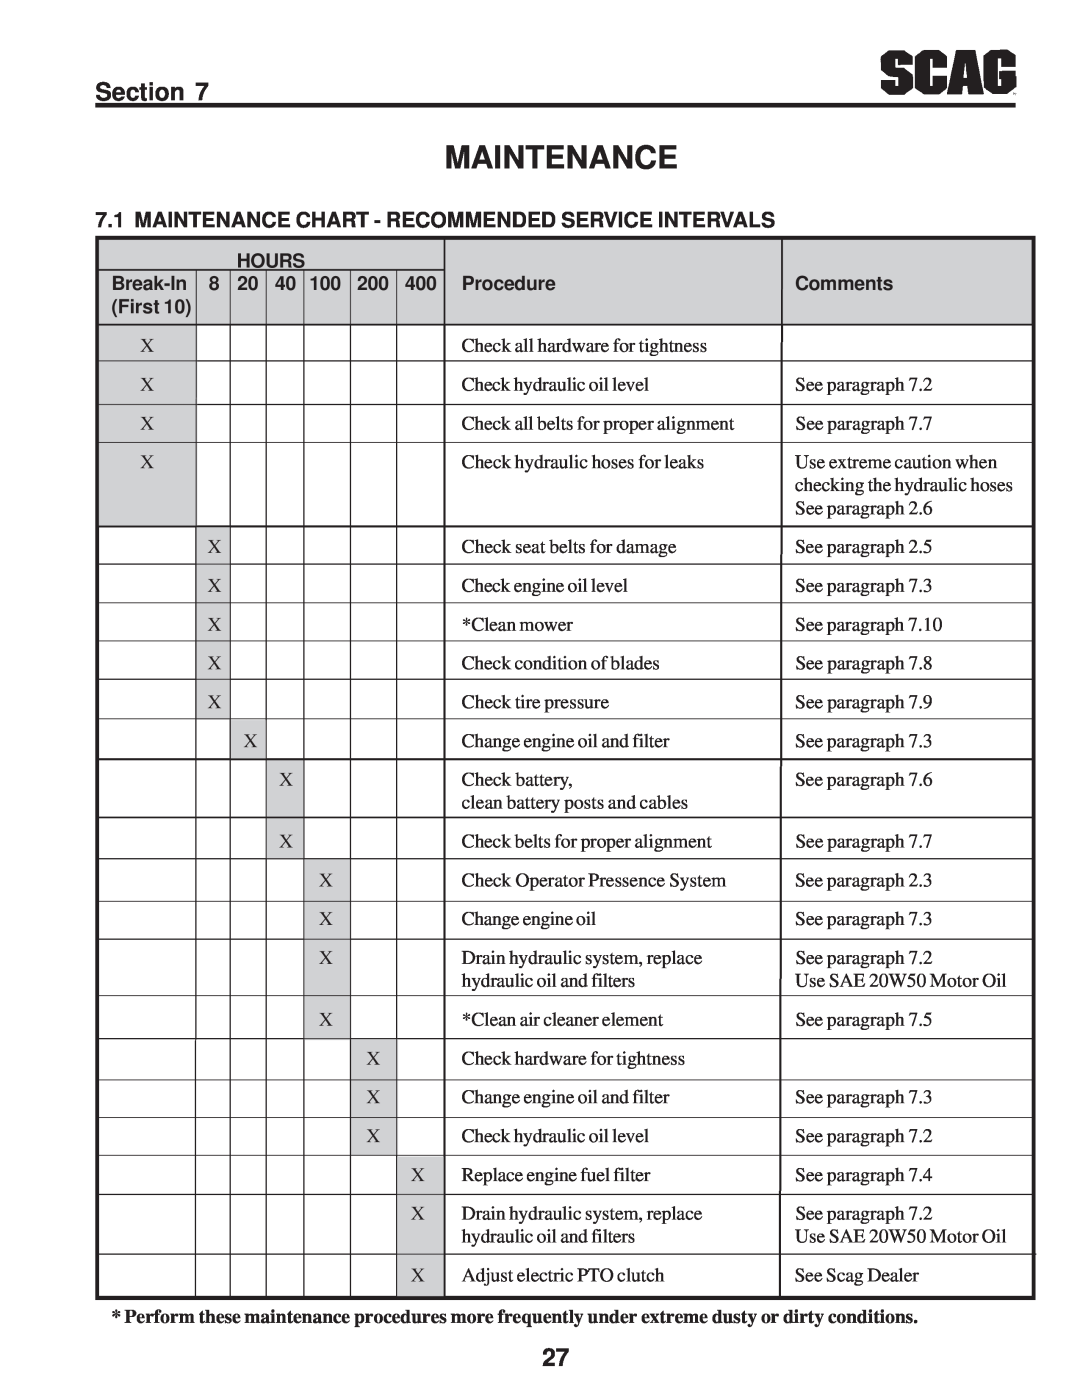 Scag Power Equipment SFZ manual Maintenance Chart - Recommended Service Intervals, Hours, Break-In, Procedure, Comments 